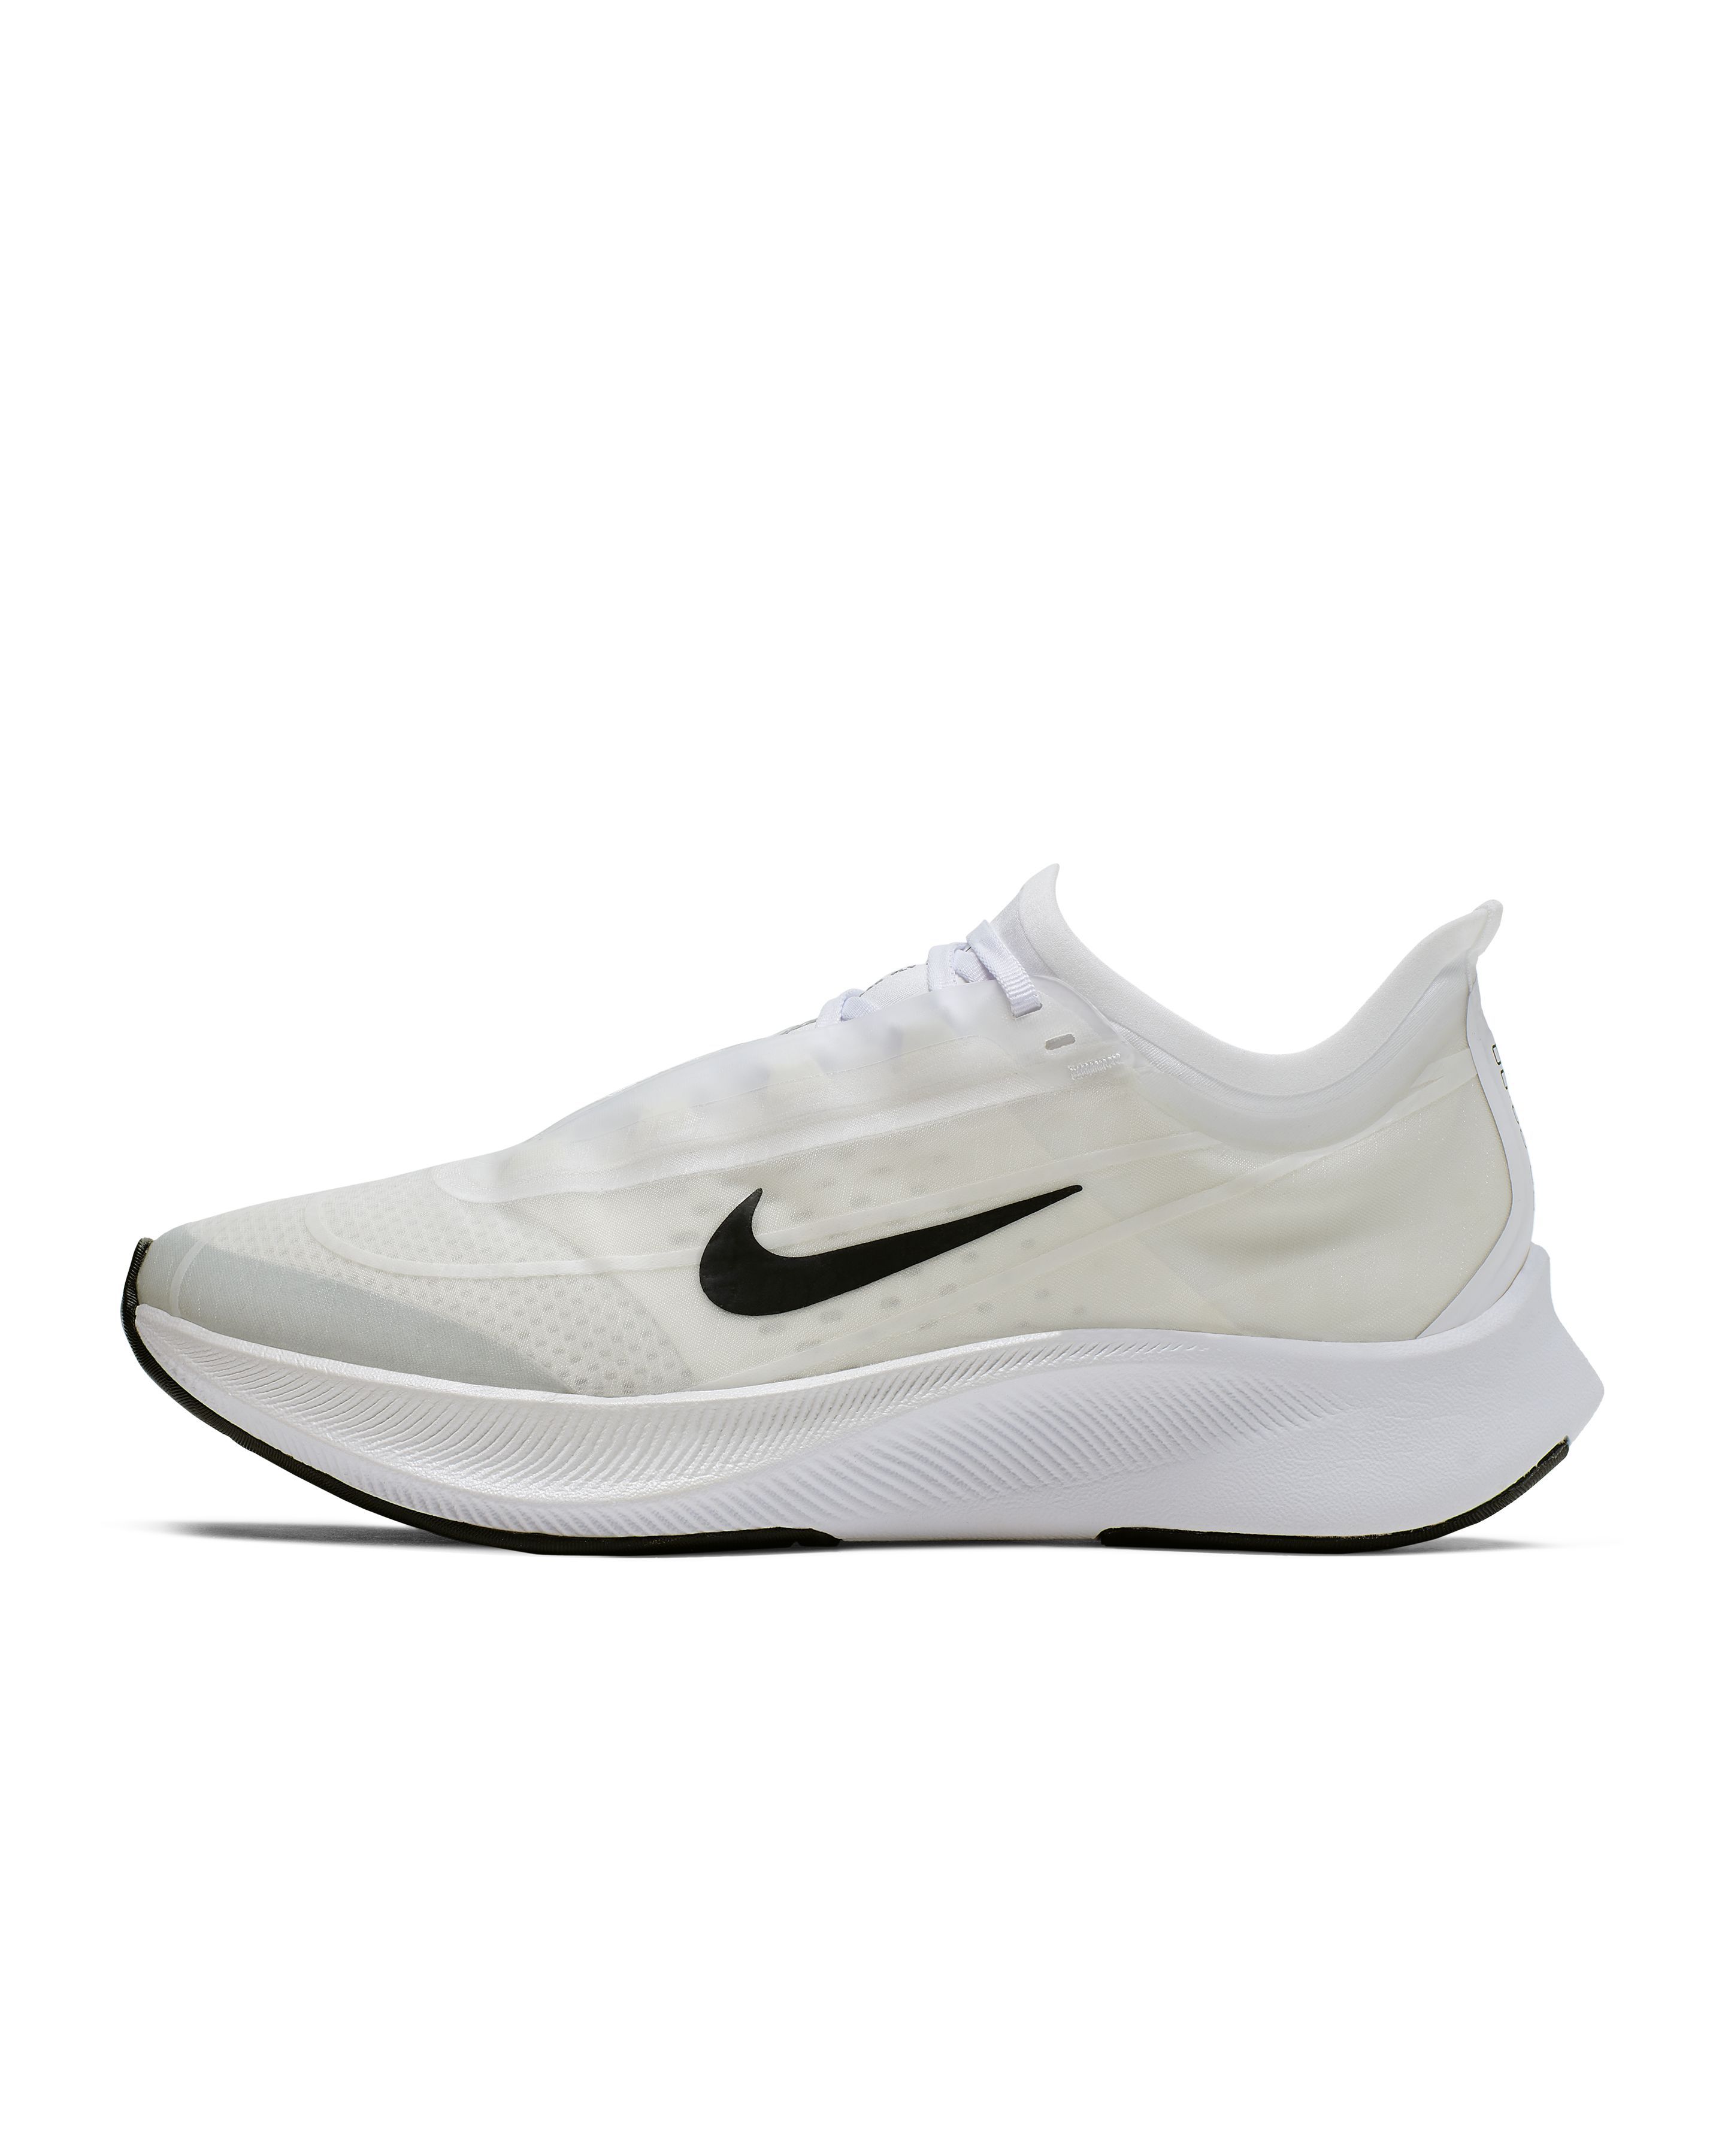 white nike running shoes with black swoosh